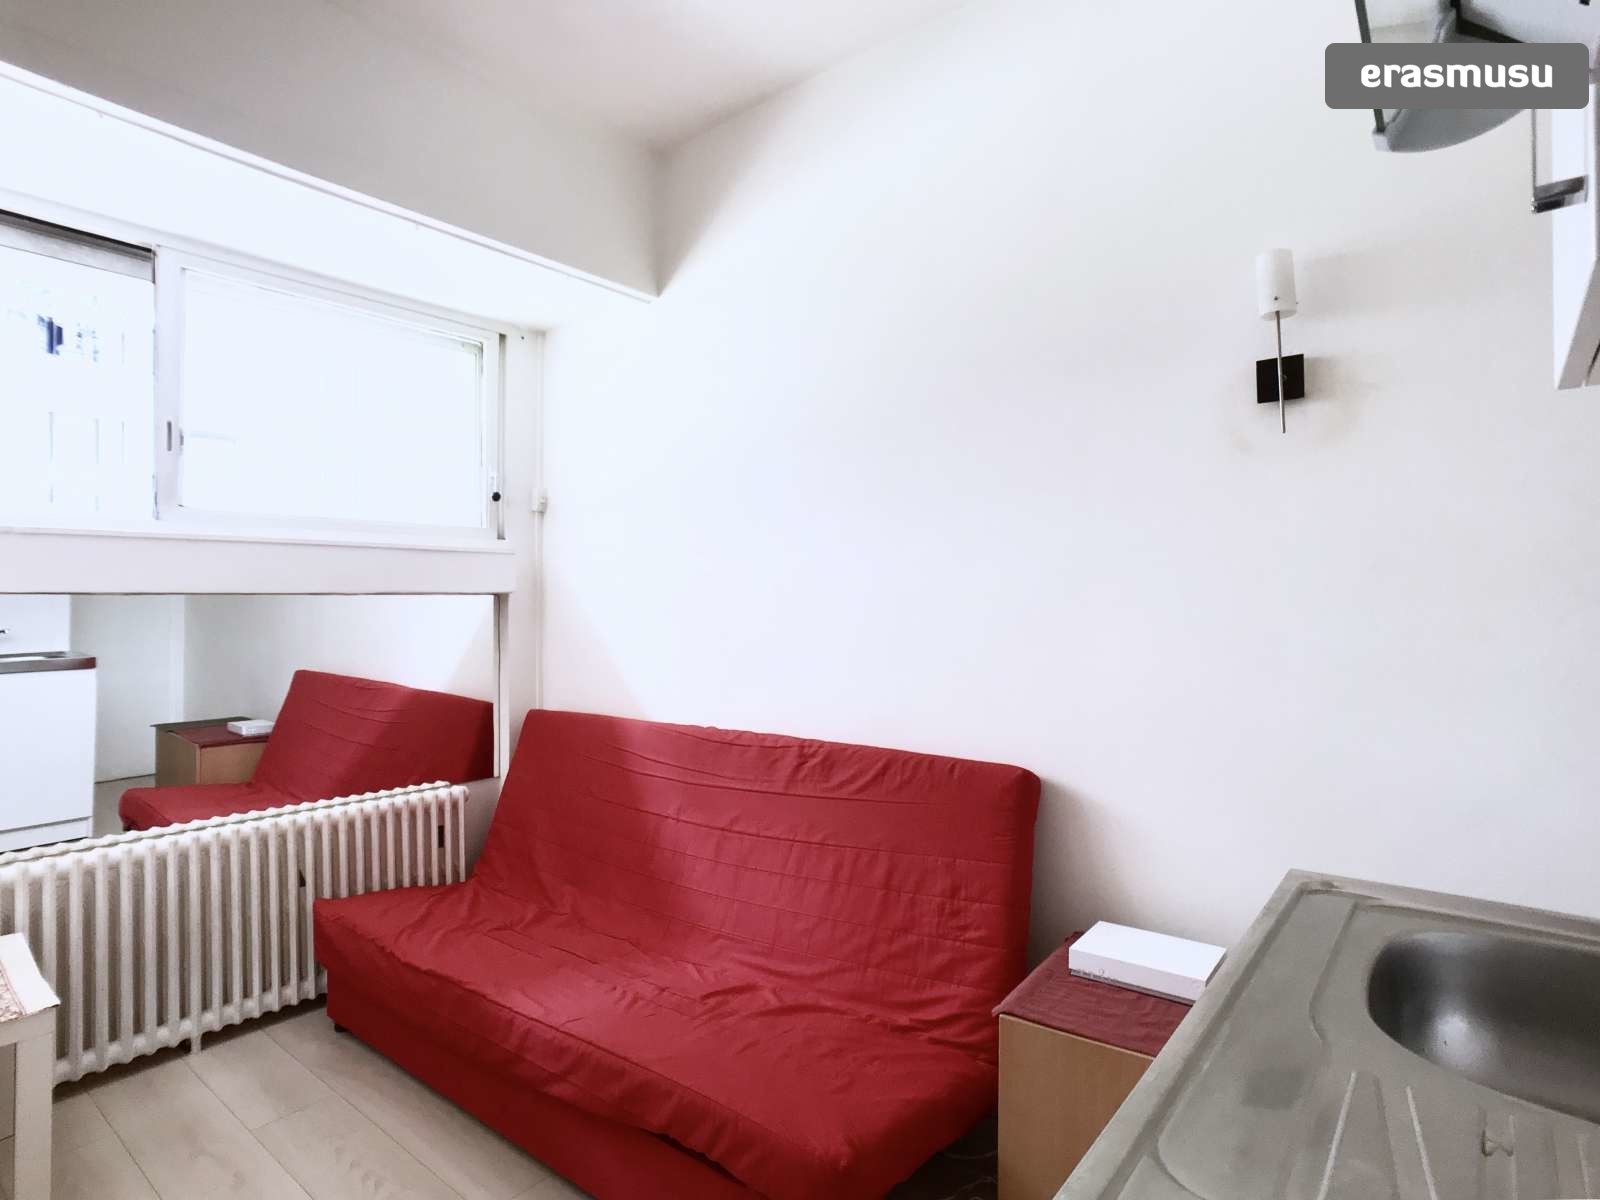 View Small Studio Apartments For Rent Near Me Pictures ...